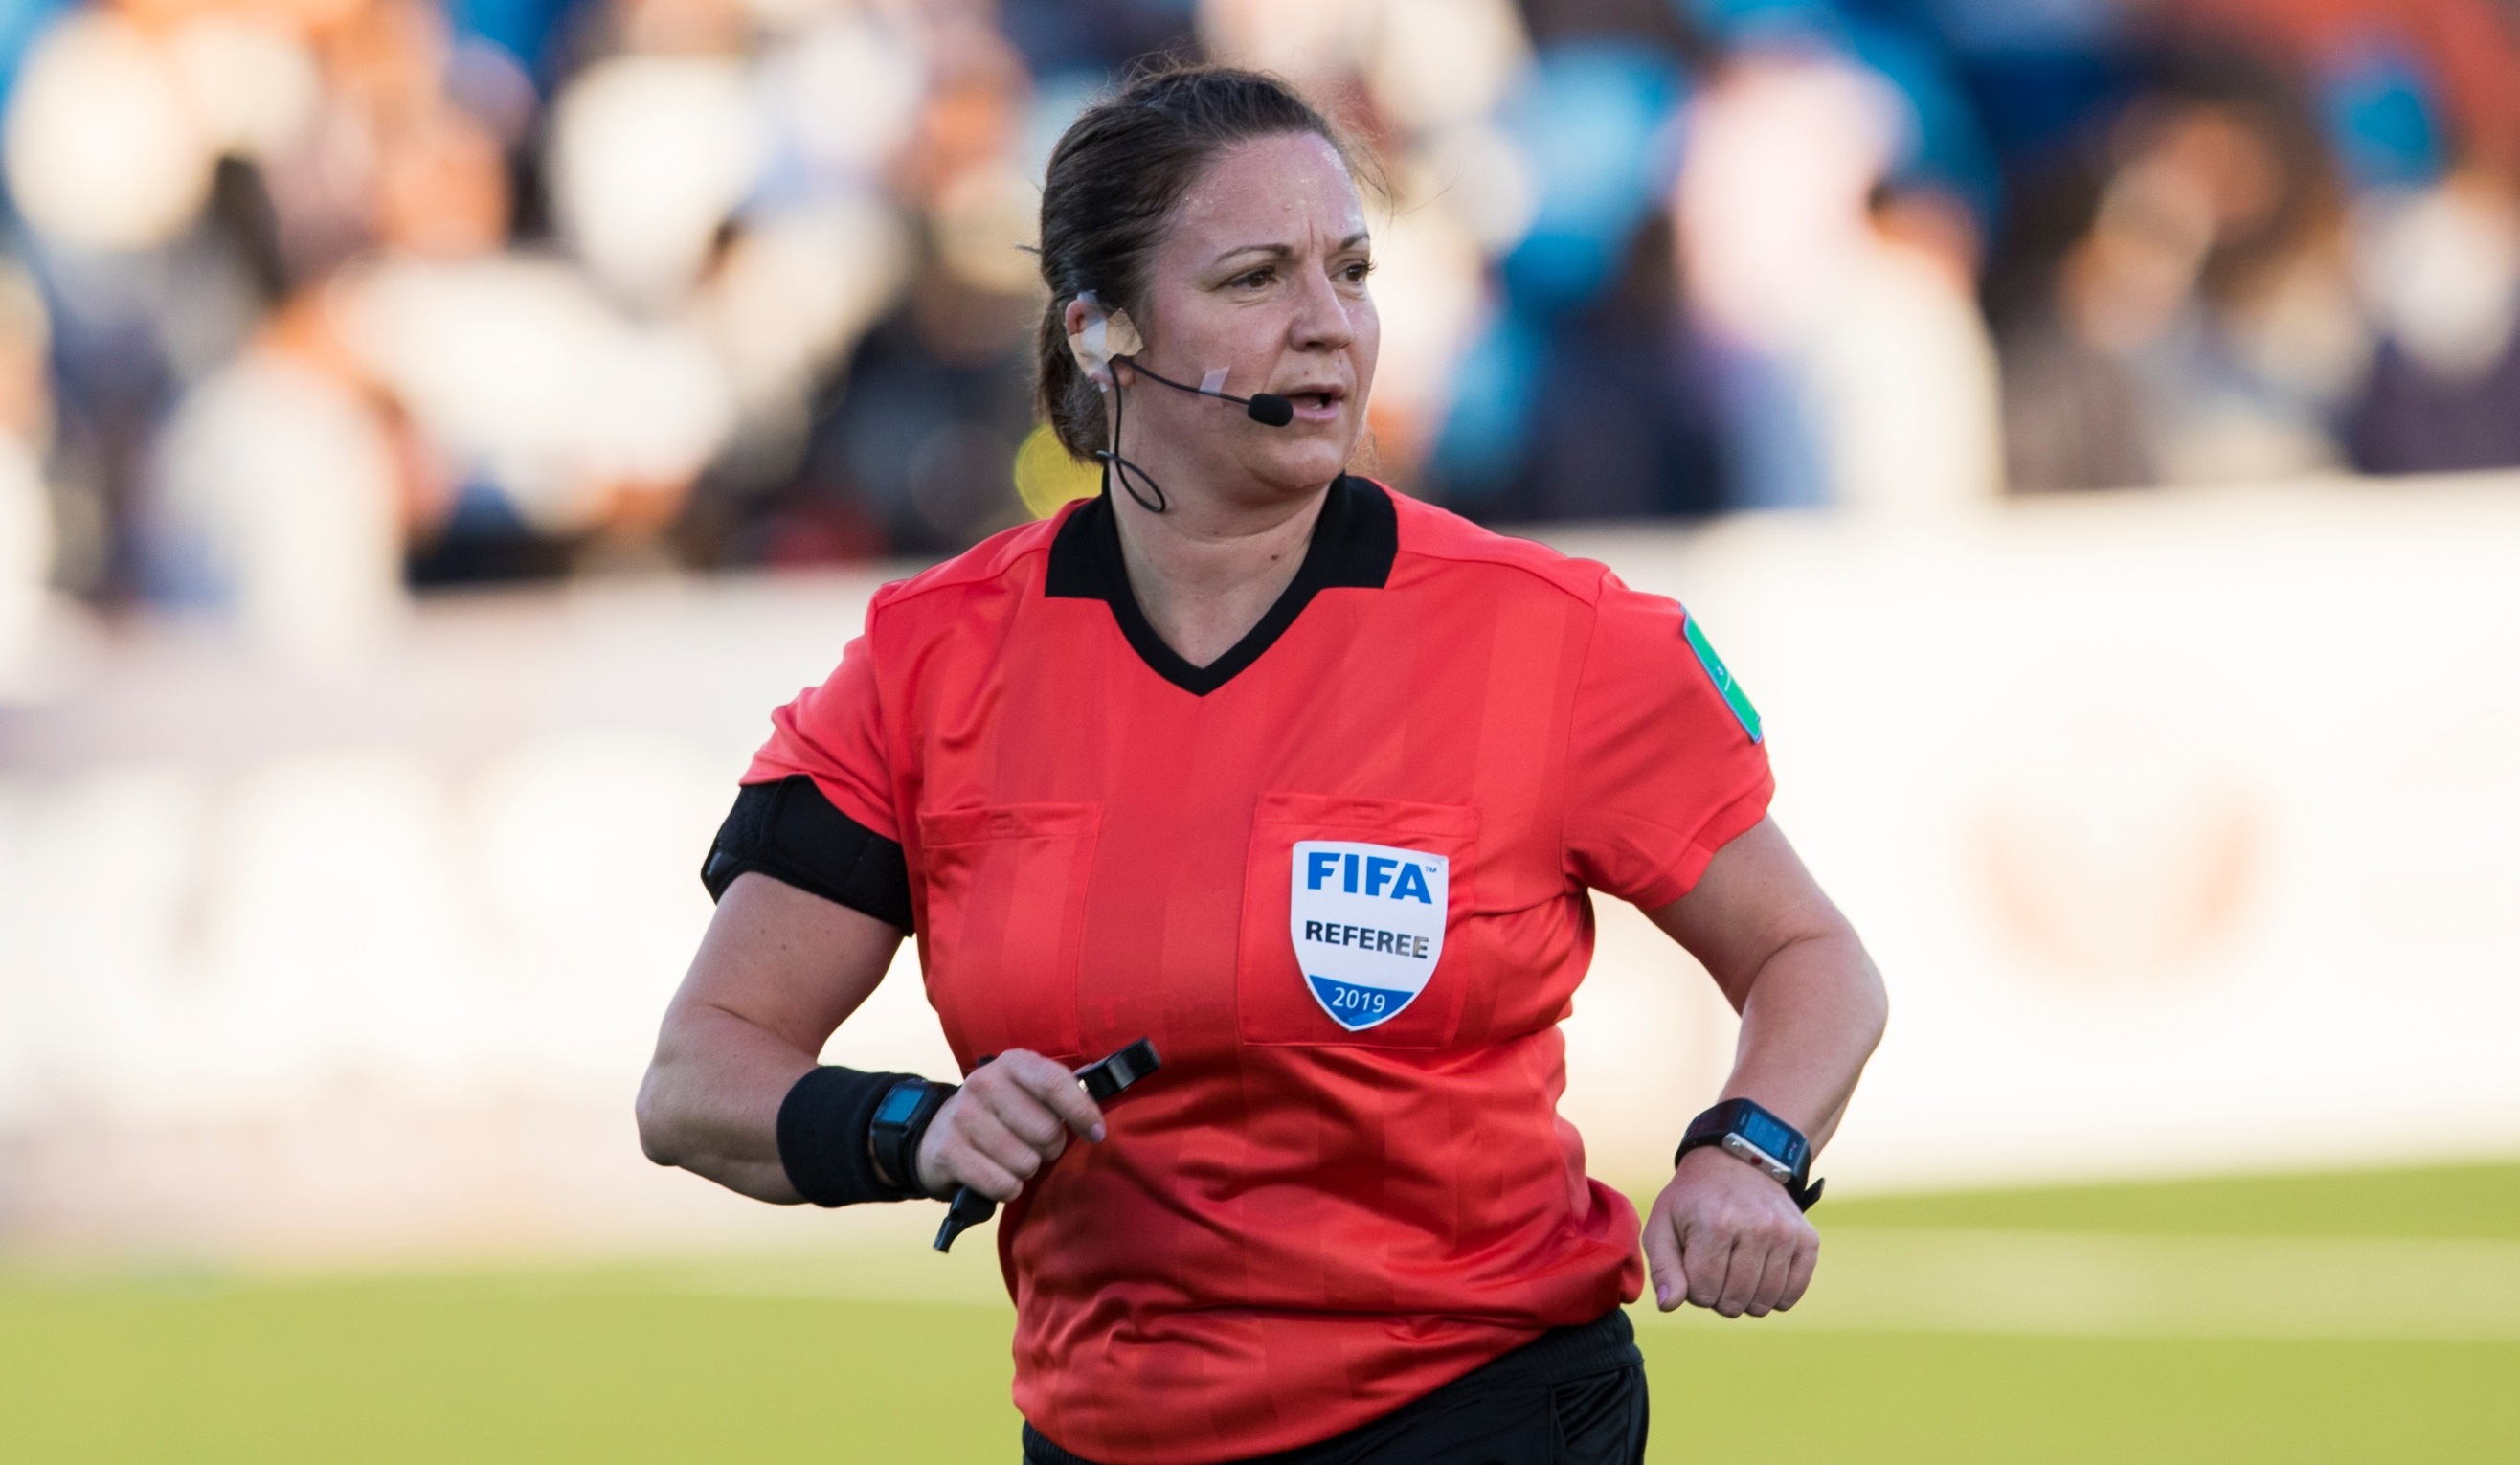 FIFA referees train in Qatar in preparation for Women's World Cup